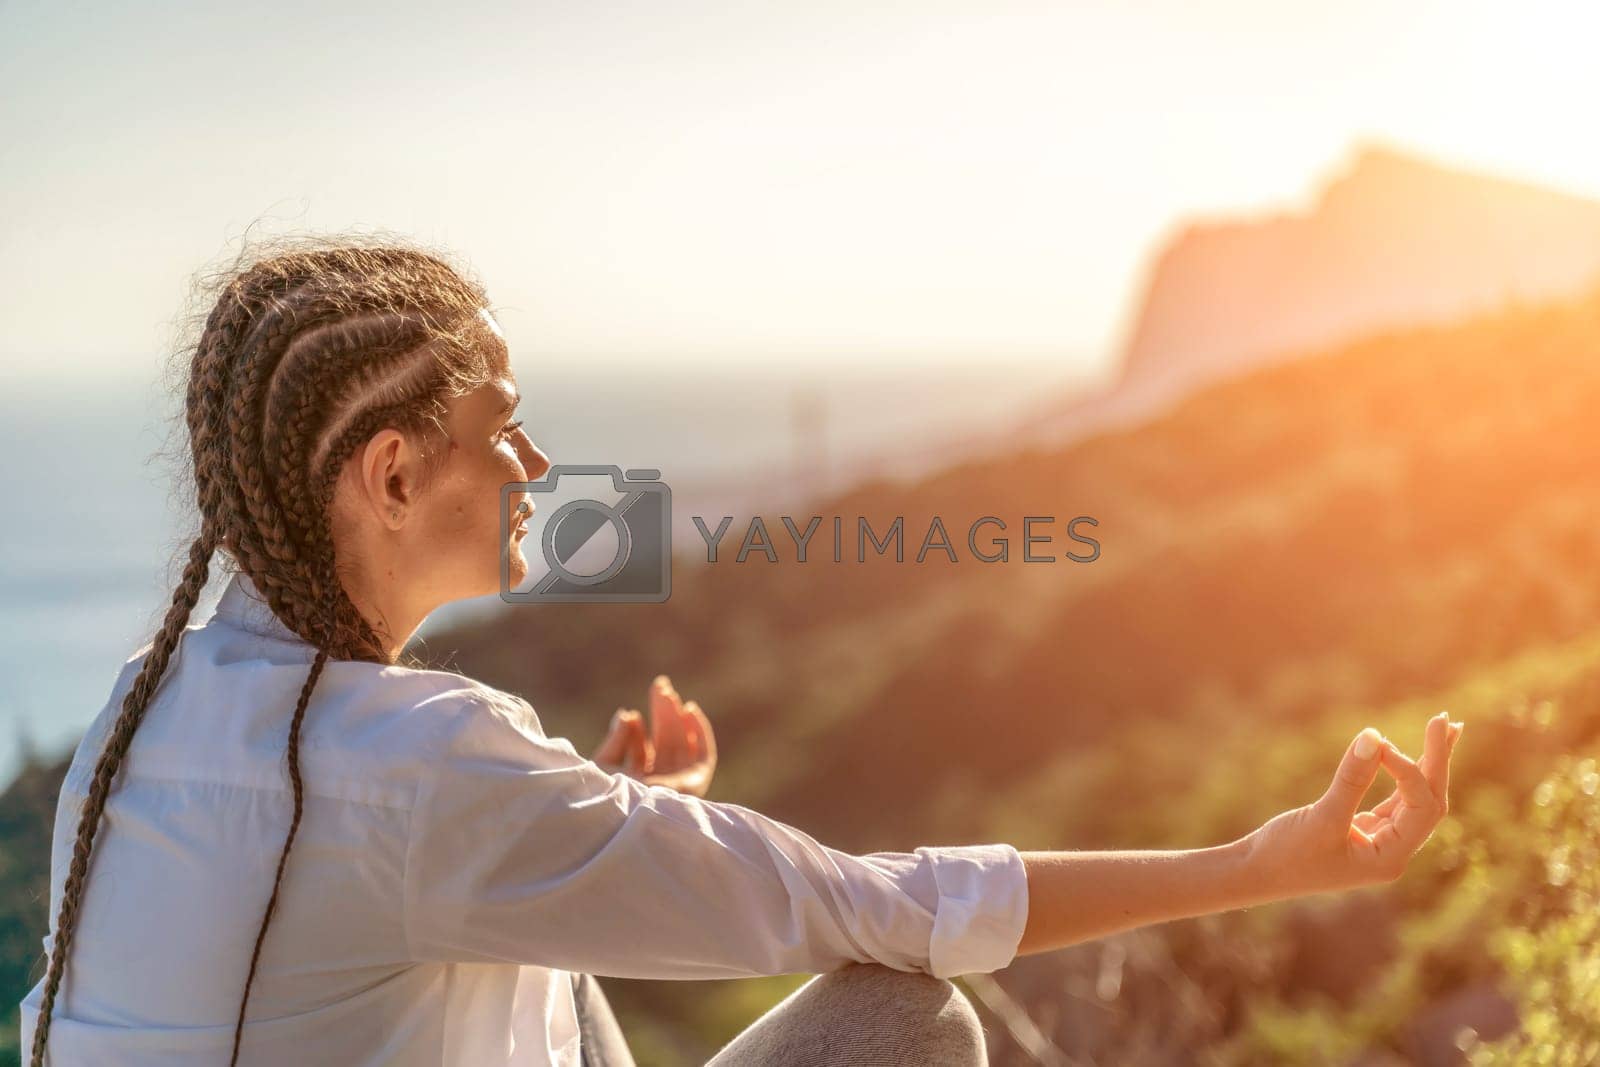 Royalty free image of Yoga woman mountains. Profile of a woman doing yoga in the top of a cliff in the mountain. Woman meditates in yoga asana Padmasana by Matiunina